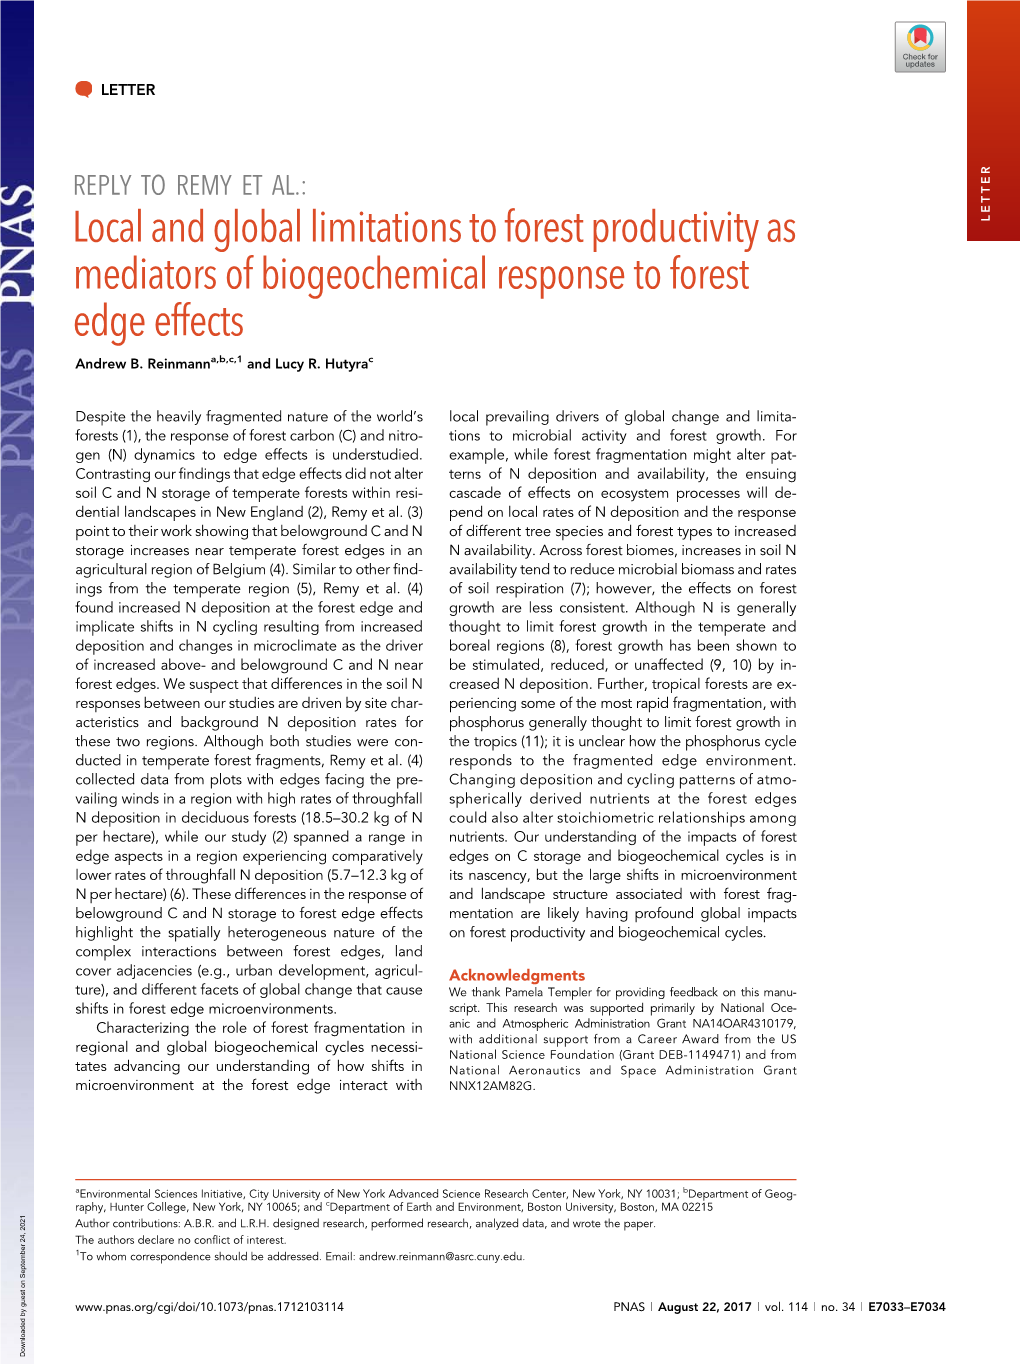 Local and Global Limitations to Forest Productivity As Mediators Of